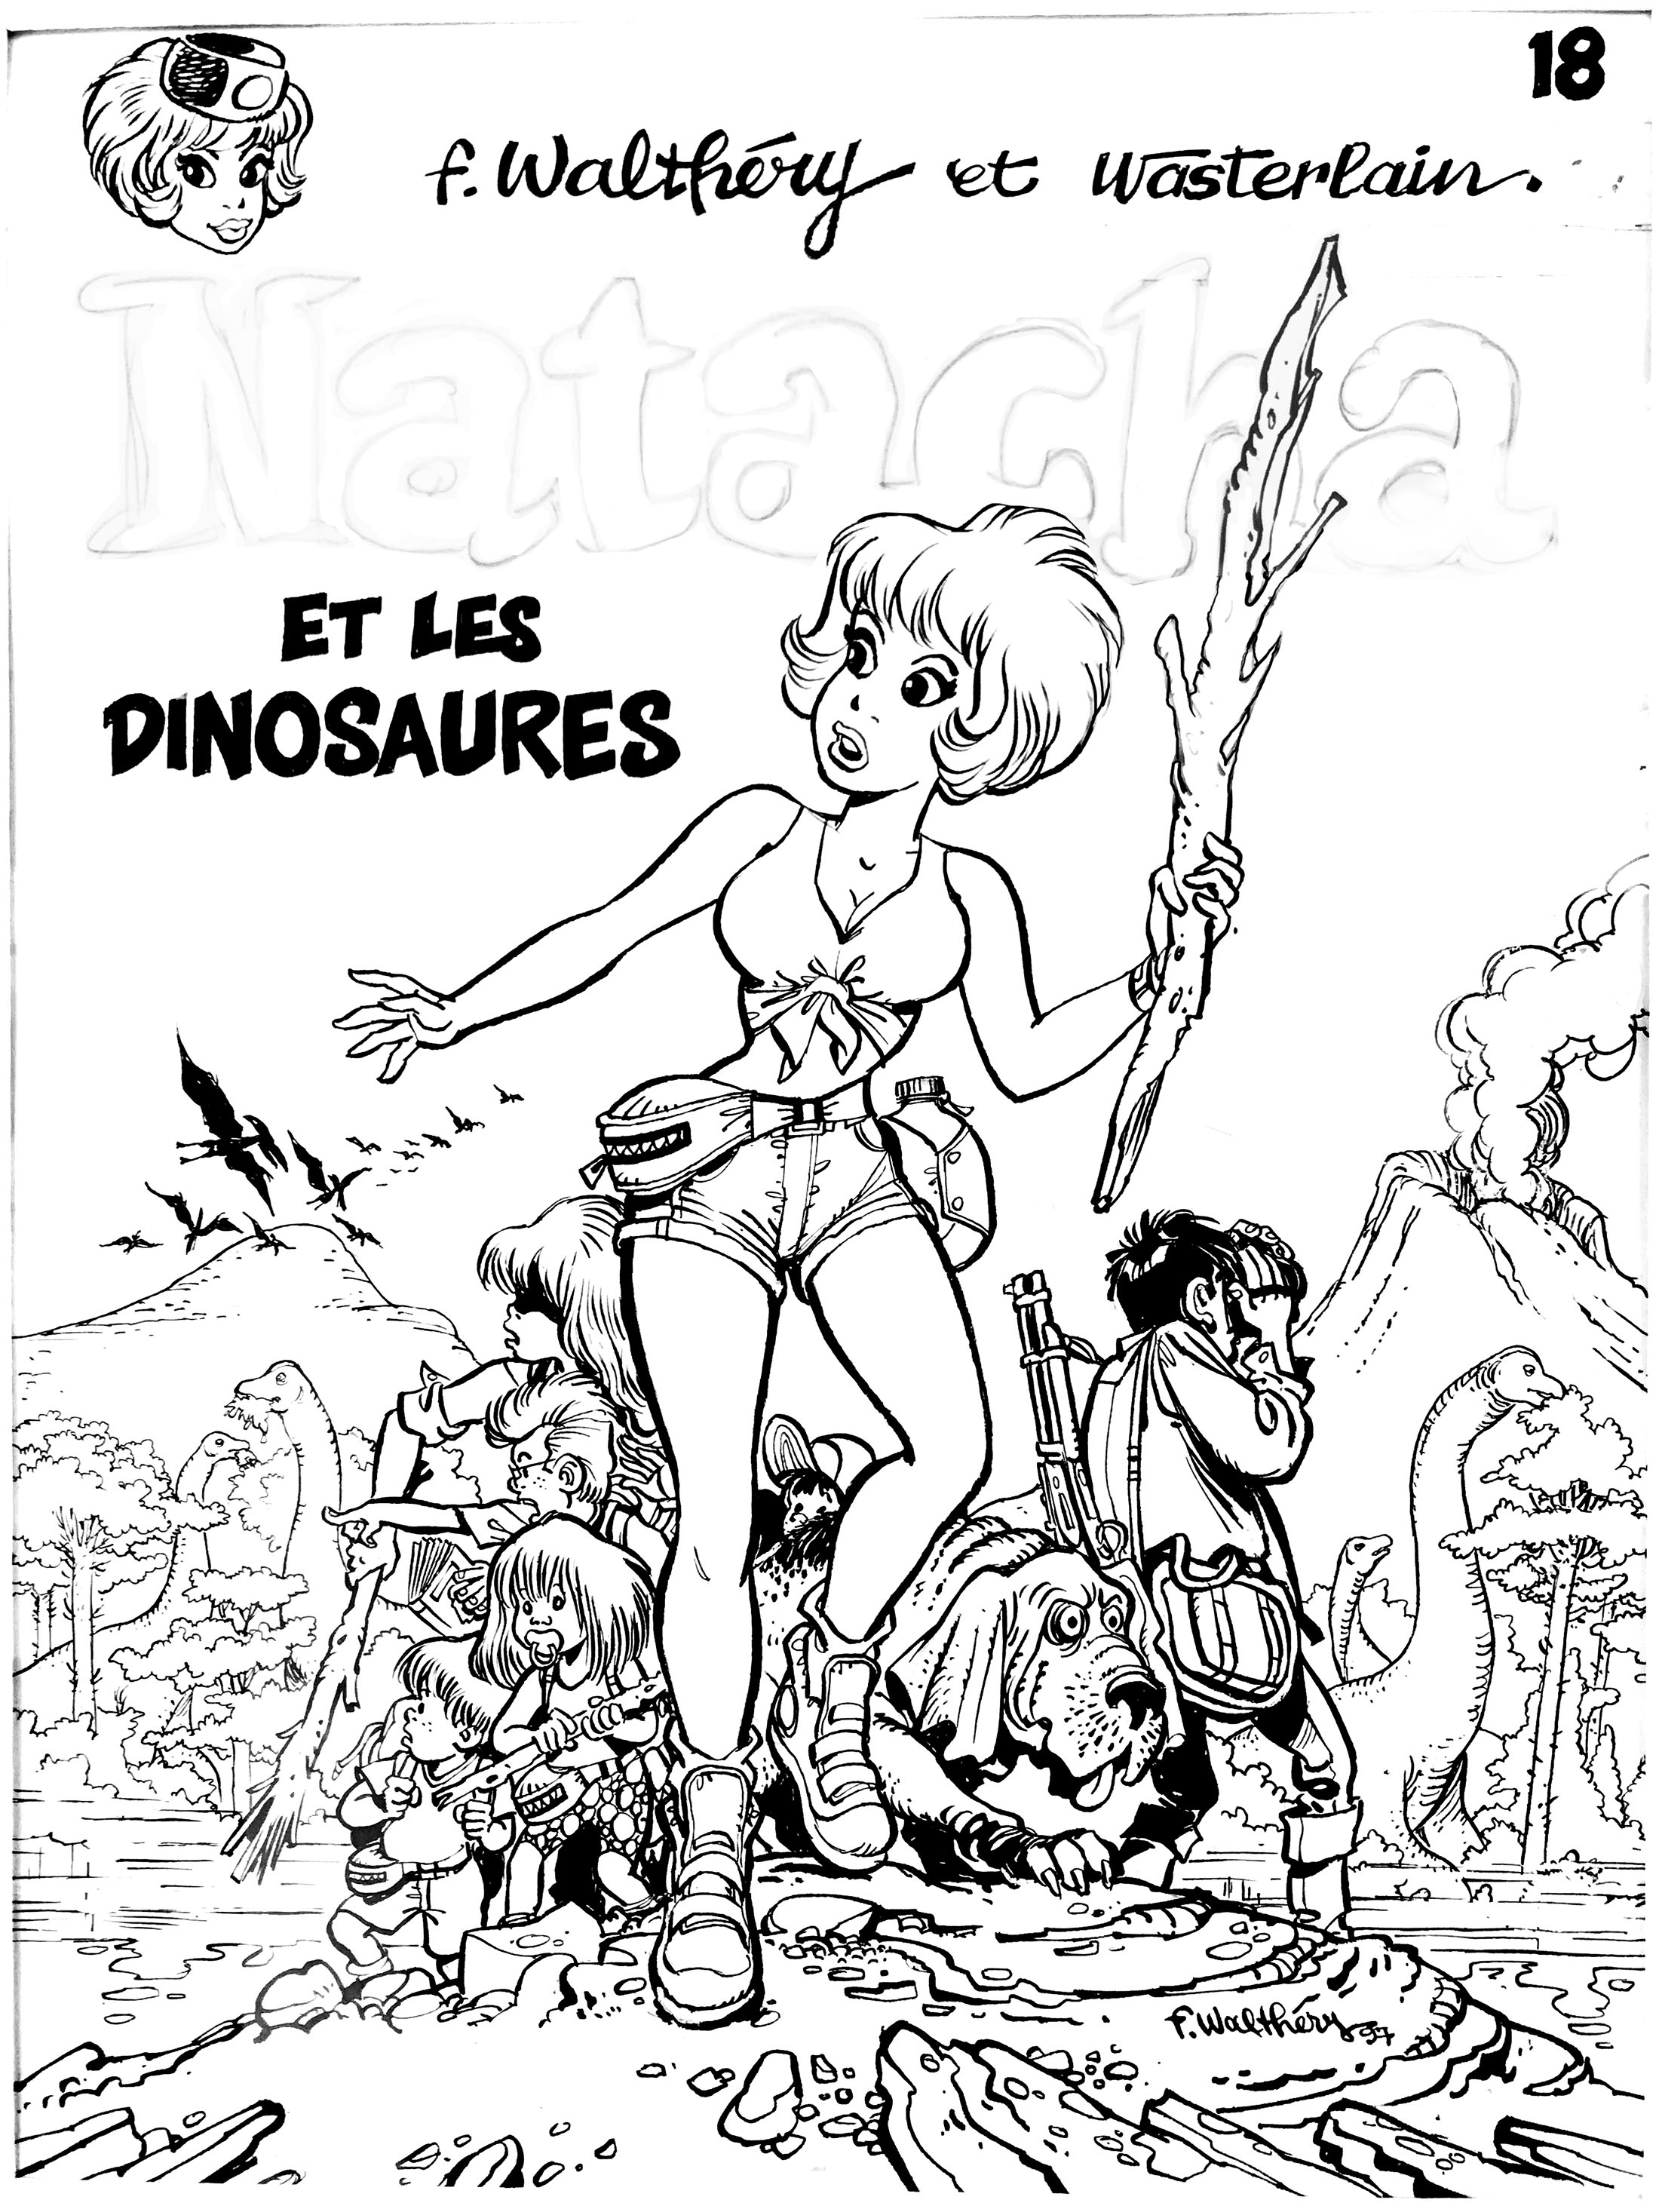 Original drawing by François Walthéry : cover of one of the episodes of Natasha, famous strip cartoon. (Brussels Comic Strip Museum)